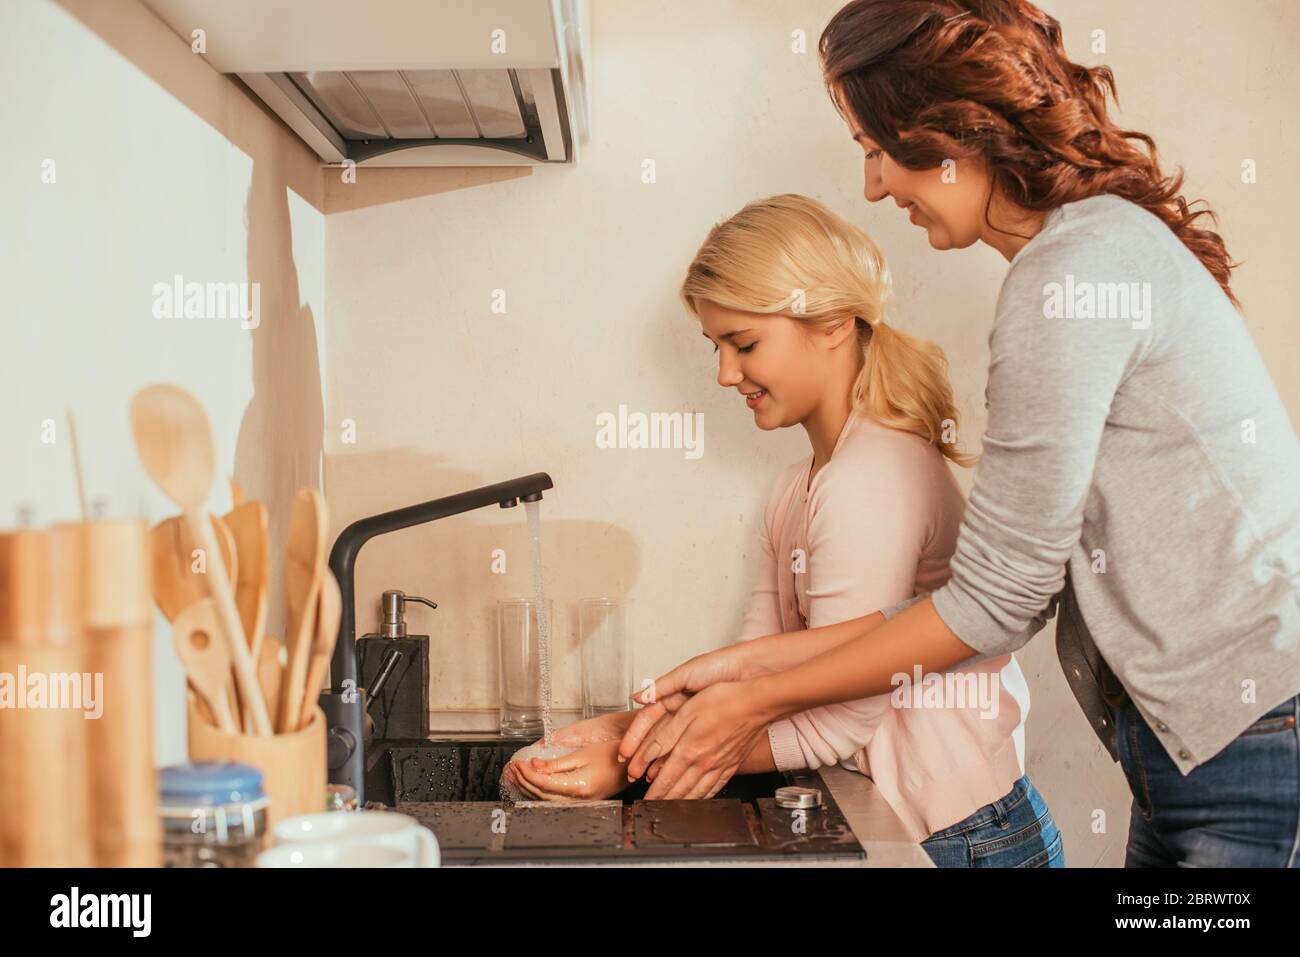 Side view of smiling mother and kid washing hands in kitchen Stock Photo